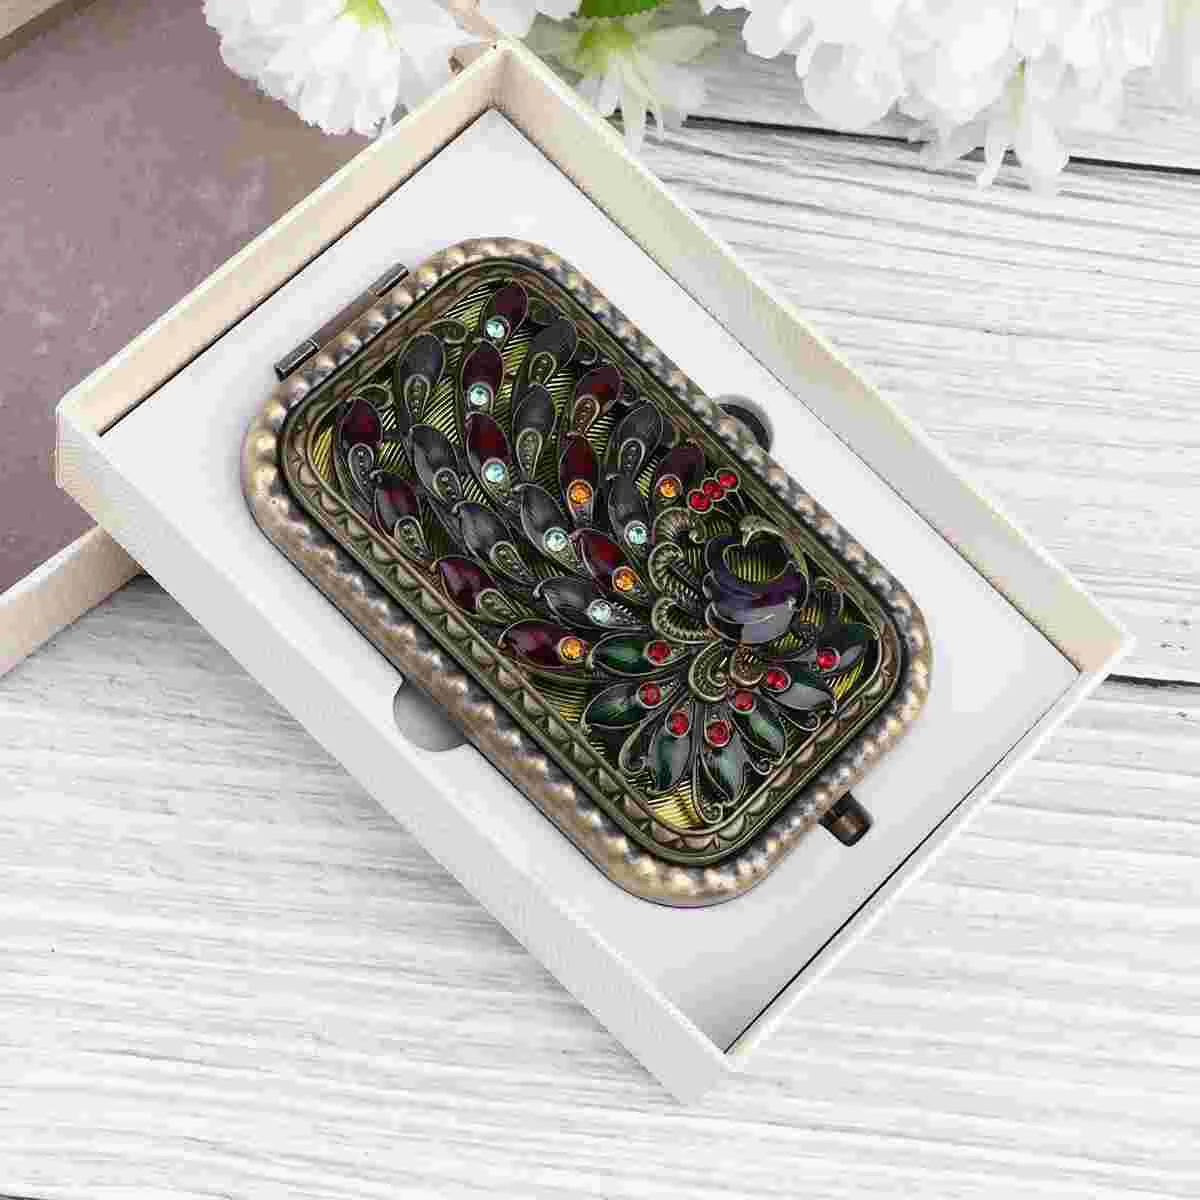 Mirror Compact Makeup Vintage Pocket Purse Foldable Double Mini Women Vanity Portable Side Travel Handheld Purses Mirrors 12 pcs red envelope bag money storage packet chinese wedding purse thicken pocket style paper new year packets